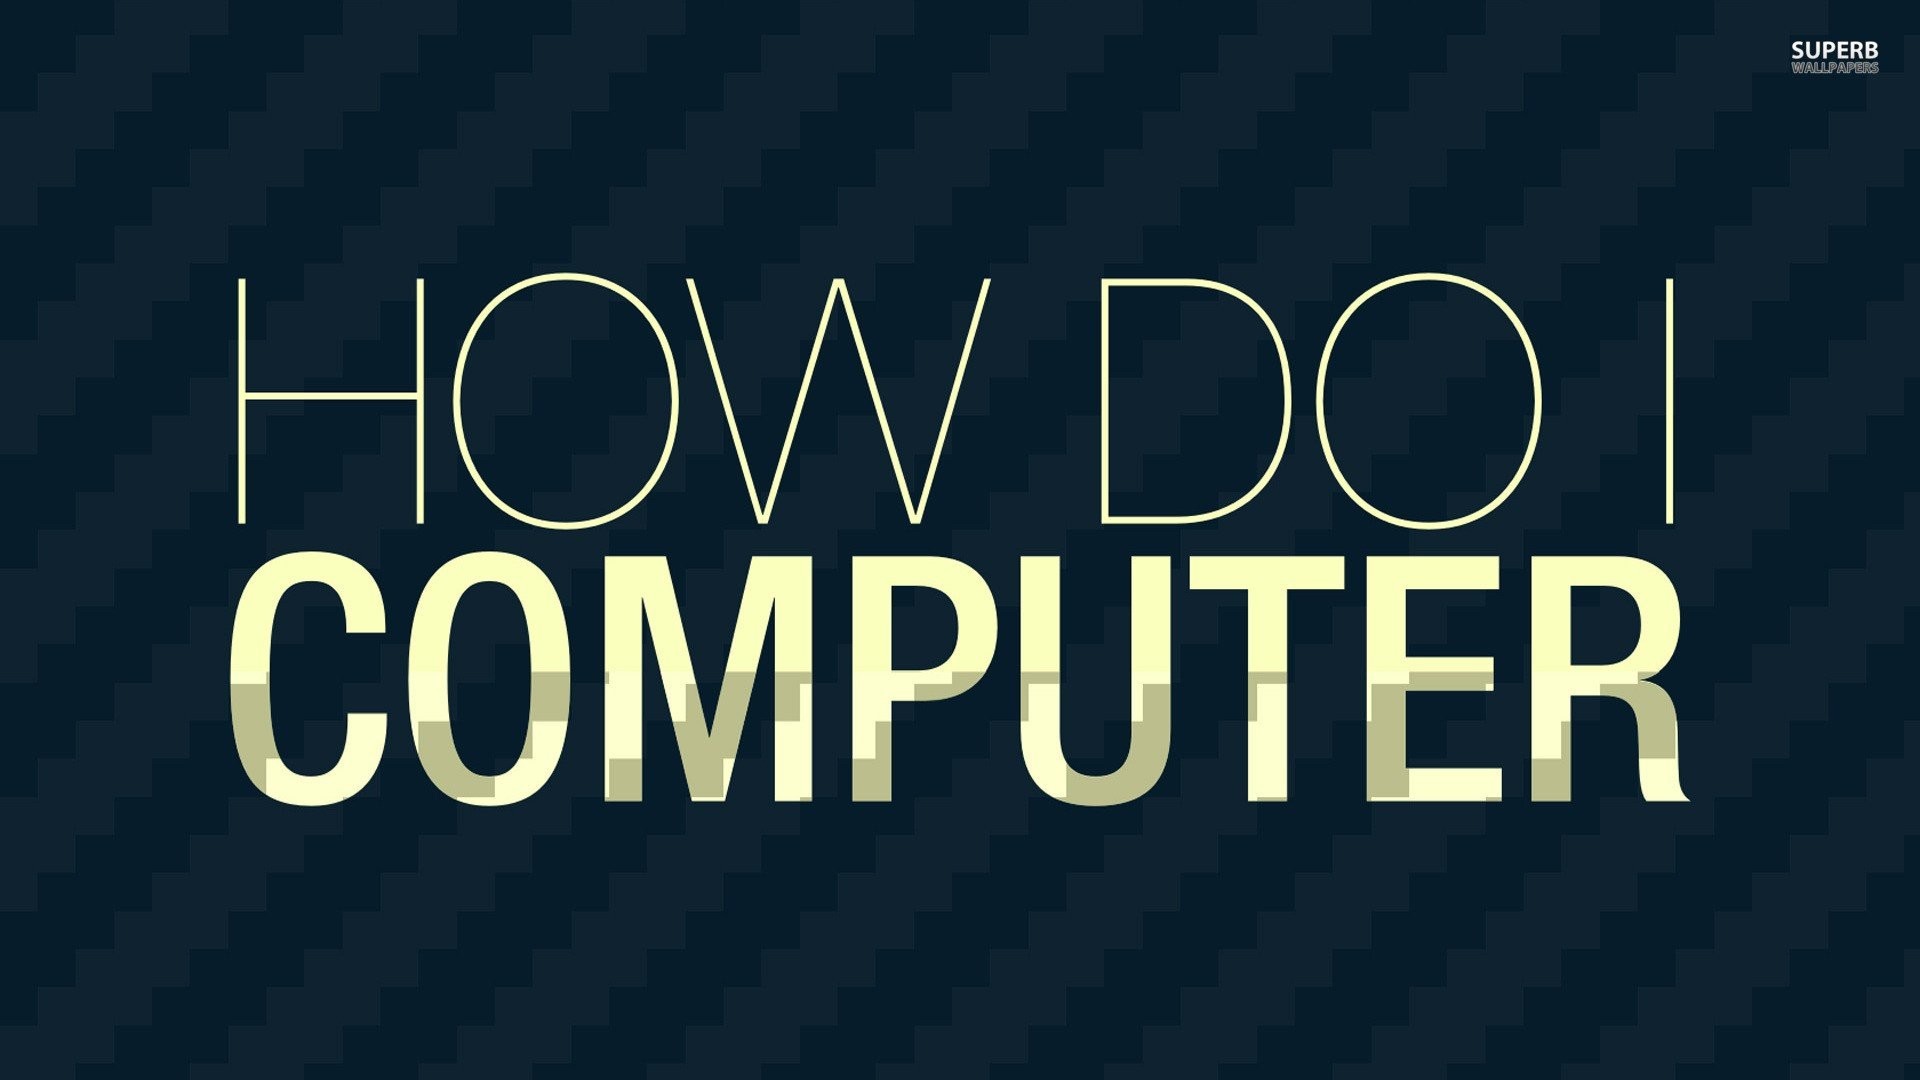 Typography About Computer , HD Wallpaper & Backgrounds